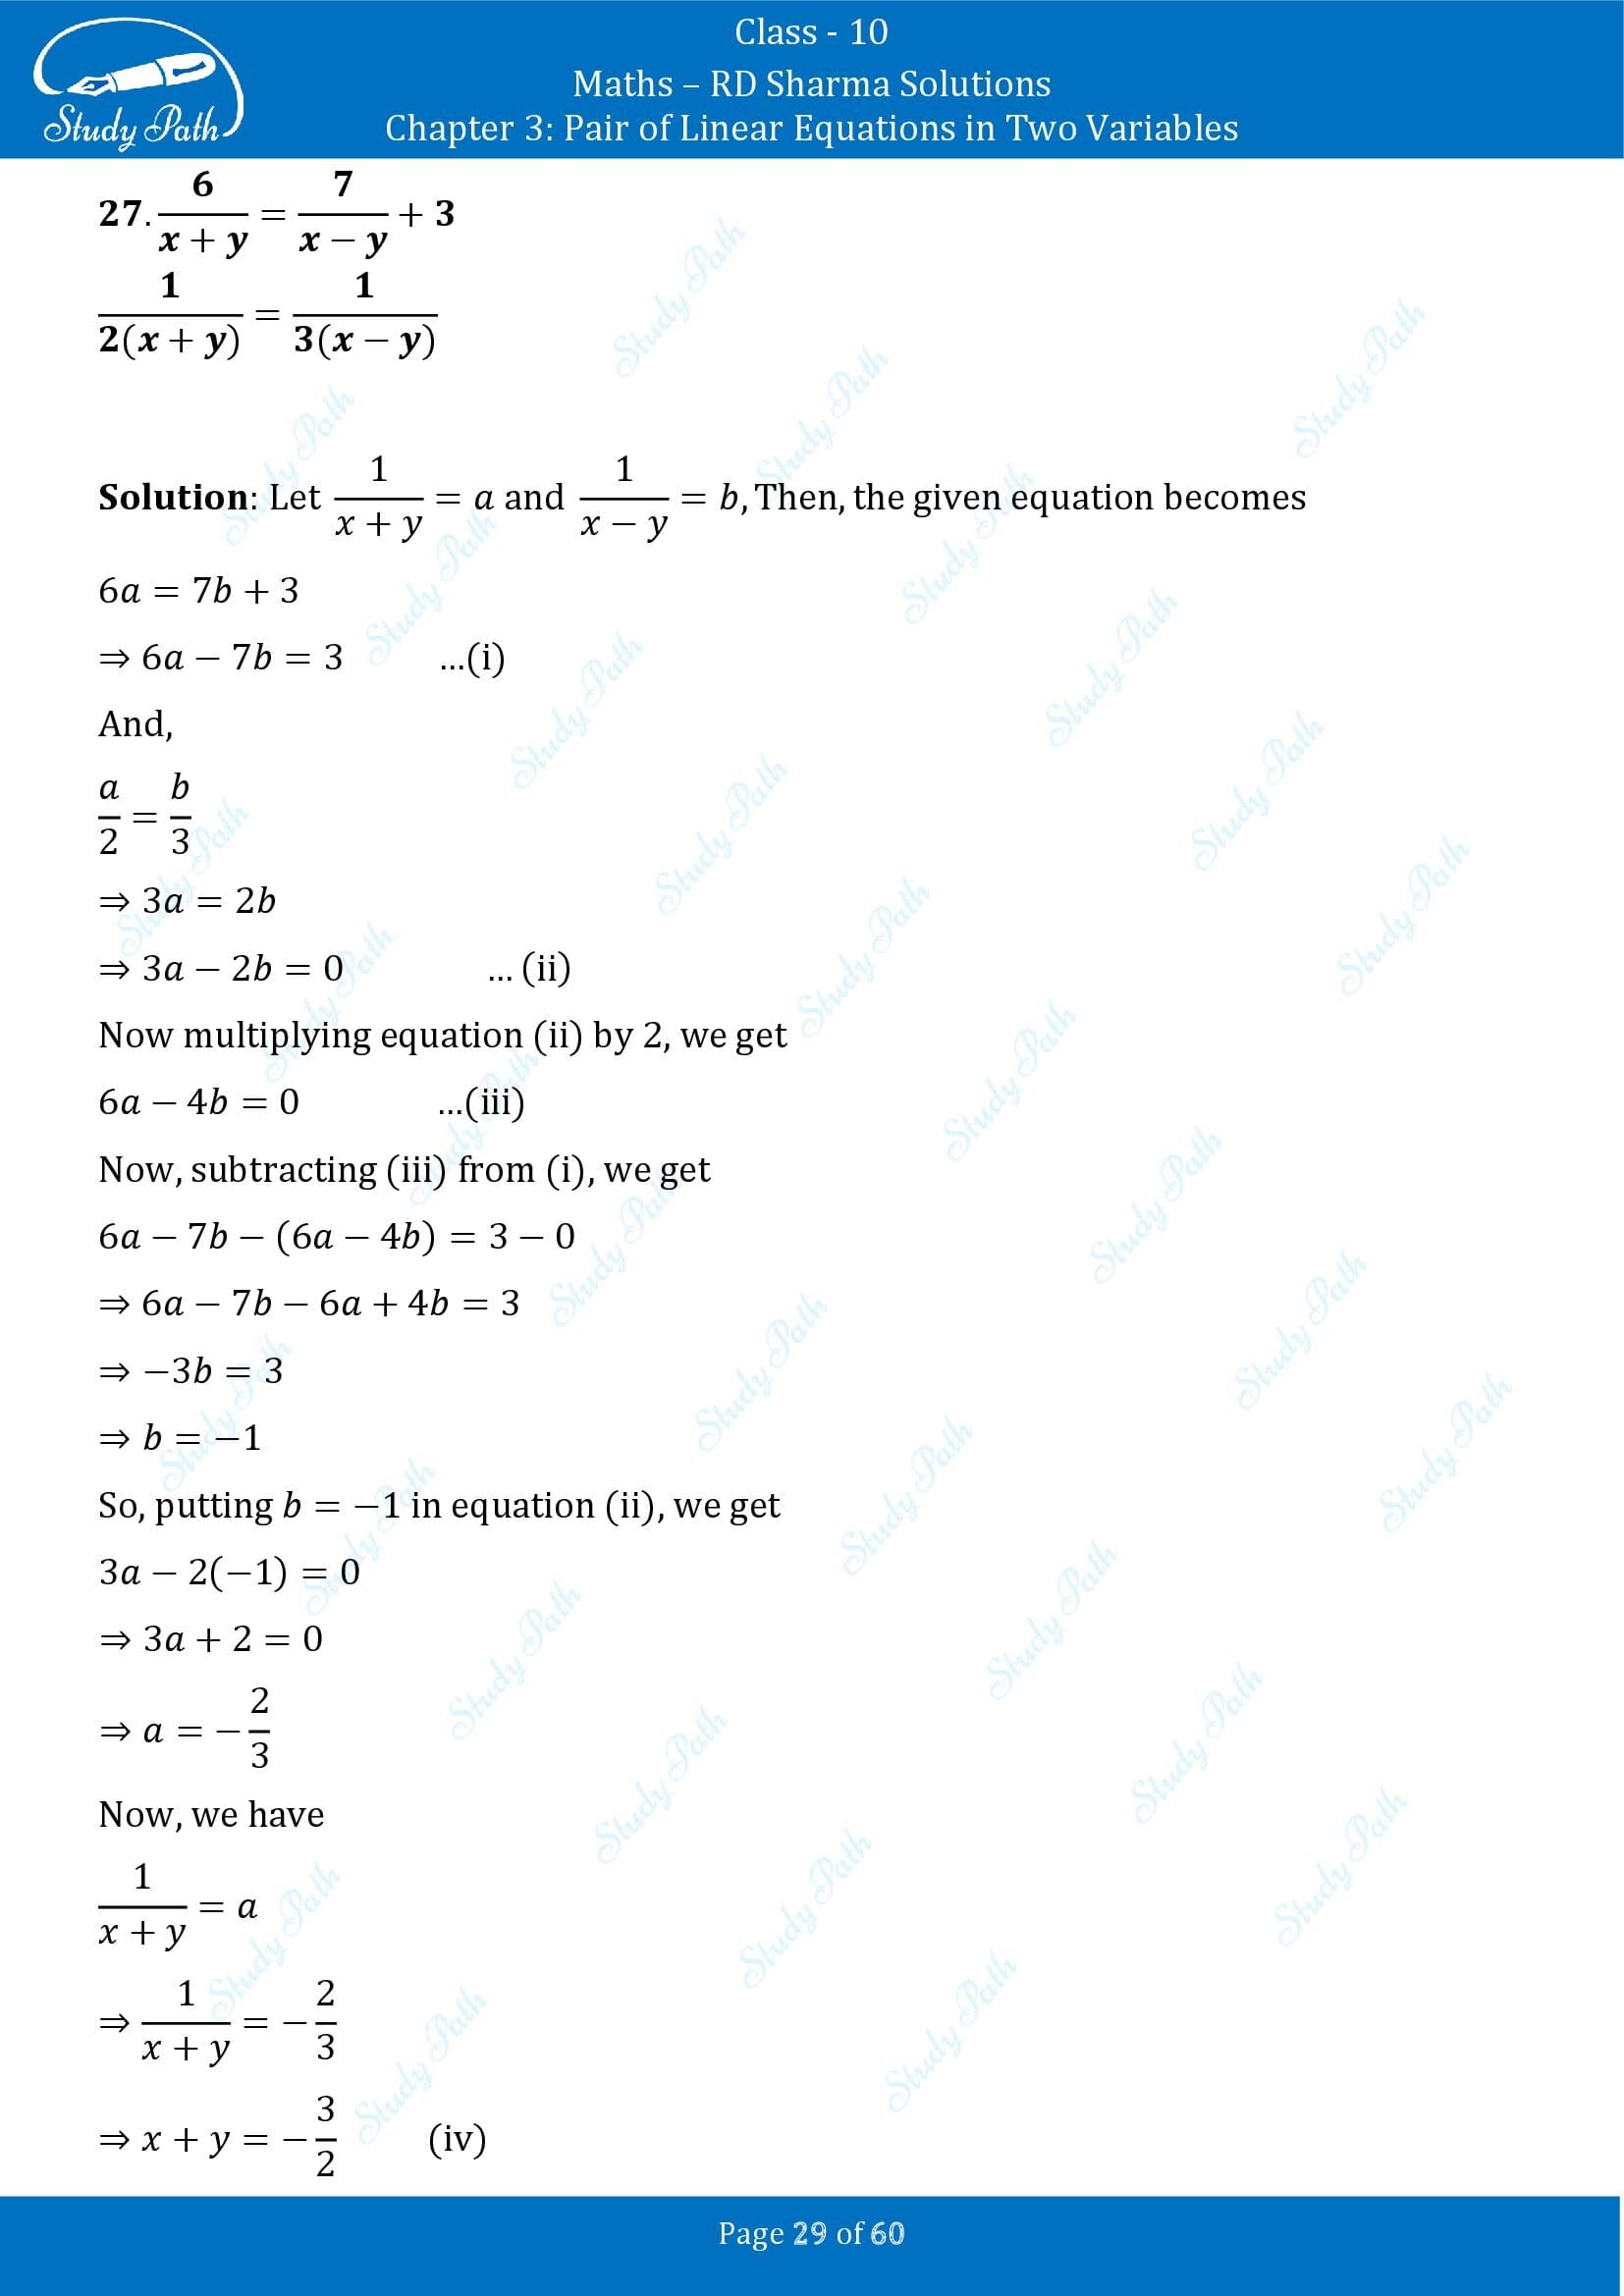 RD Sharma Solutions Class 10 Chapter 3 Pair of Linear Equations in Two Variables Exercise 3.3 00029